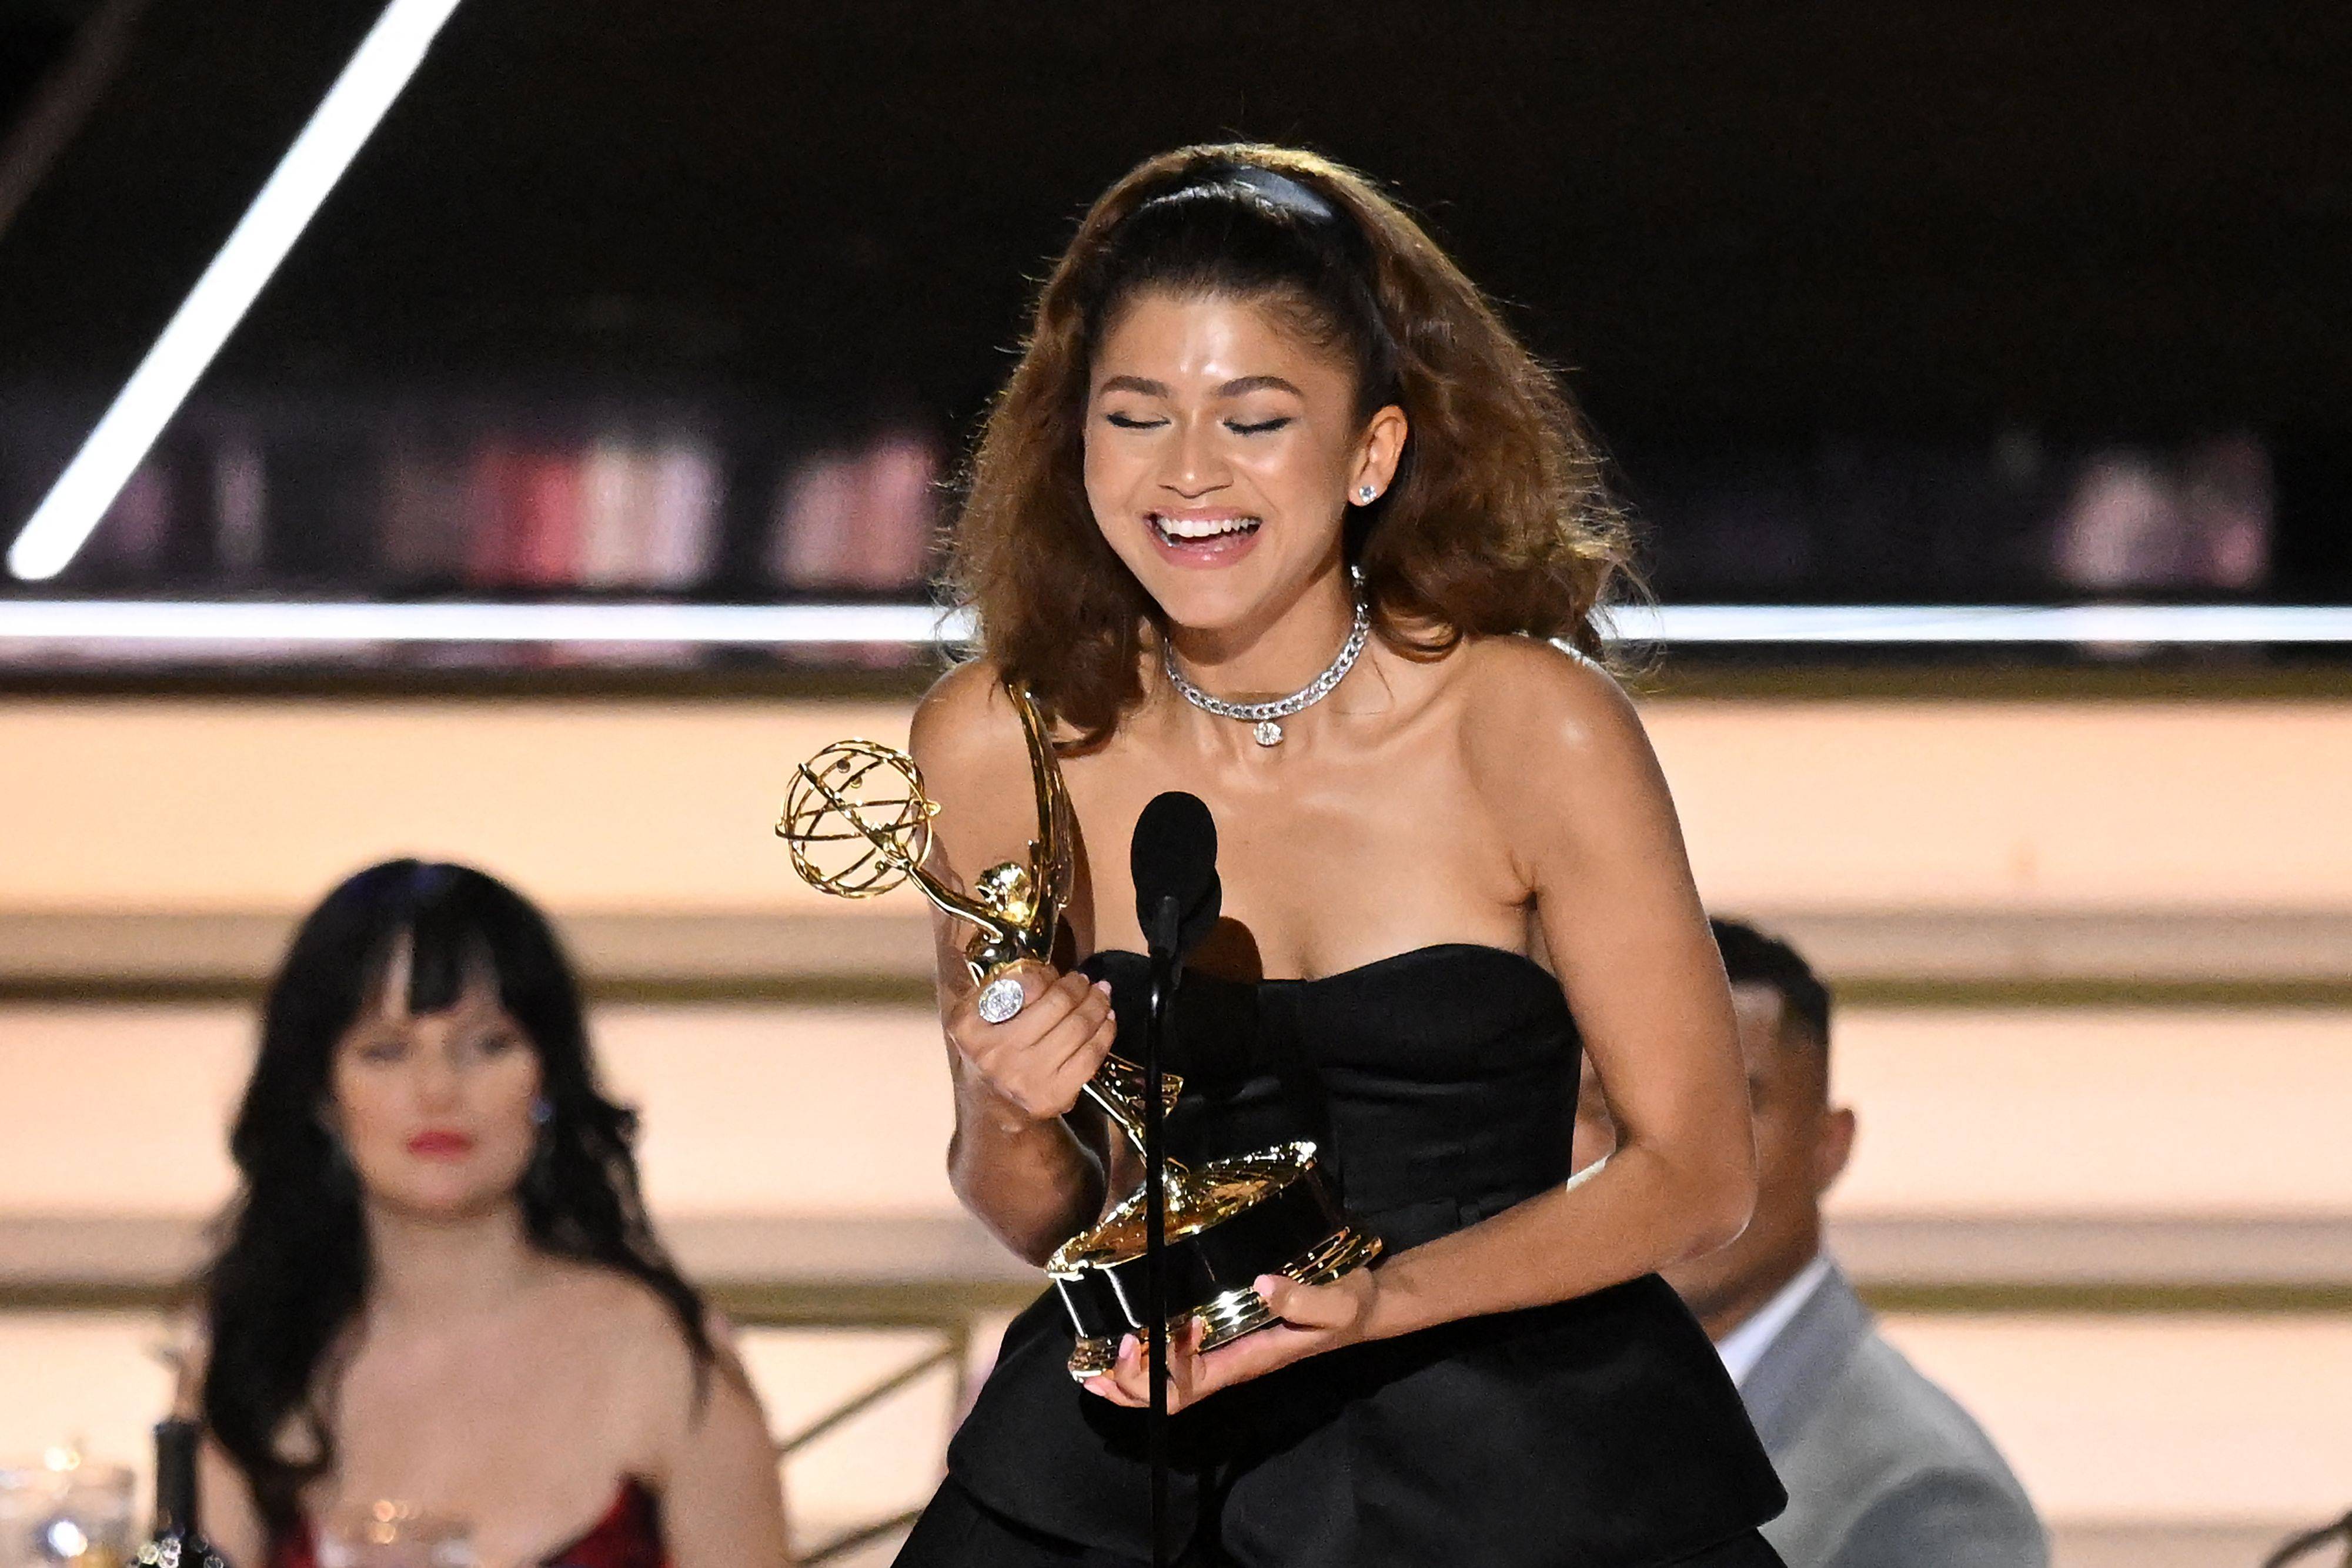 Zendaya accepts her trophy for Outstanding Lead Actress in a Drama Series for her work on 'Euphoria' onstage in a black dress at the 2022 Emmys.